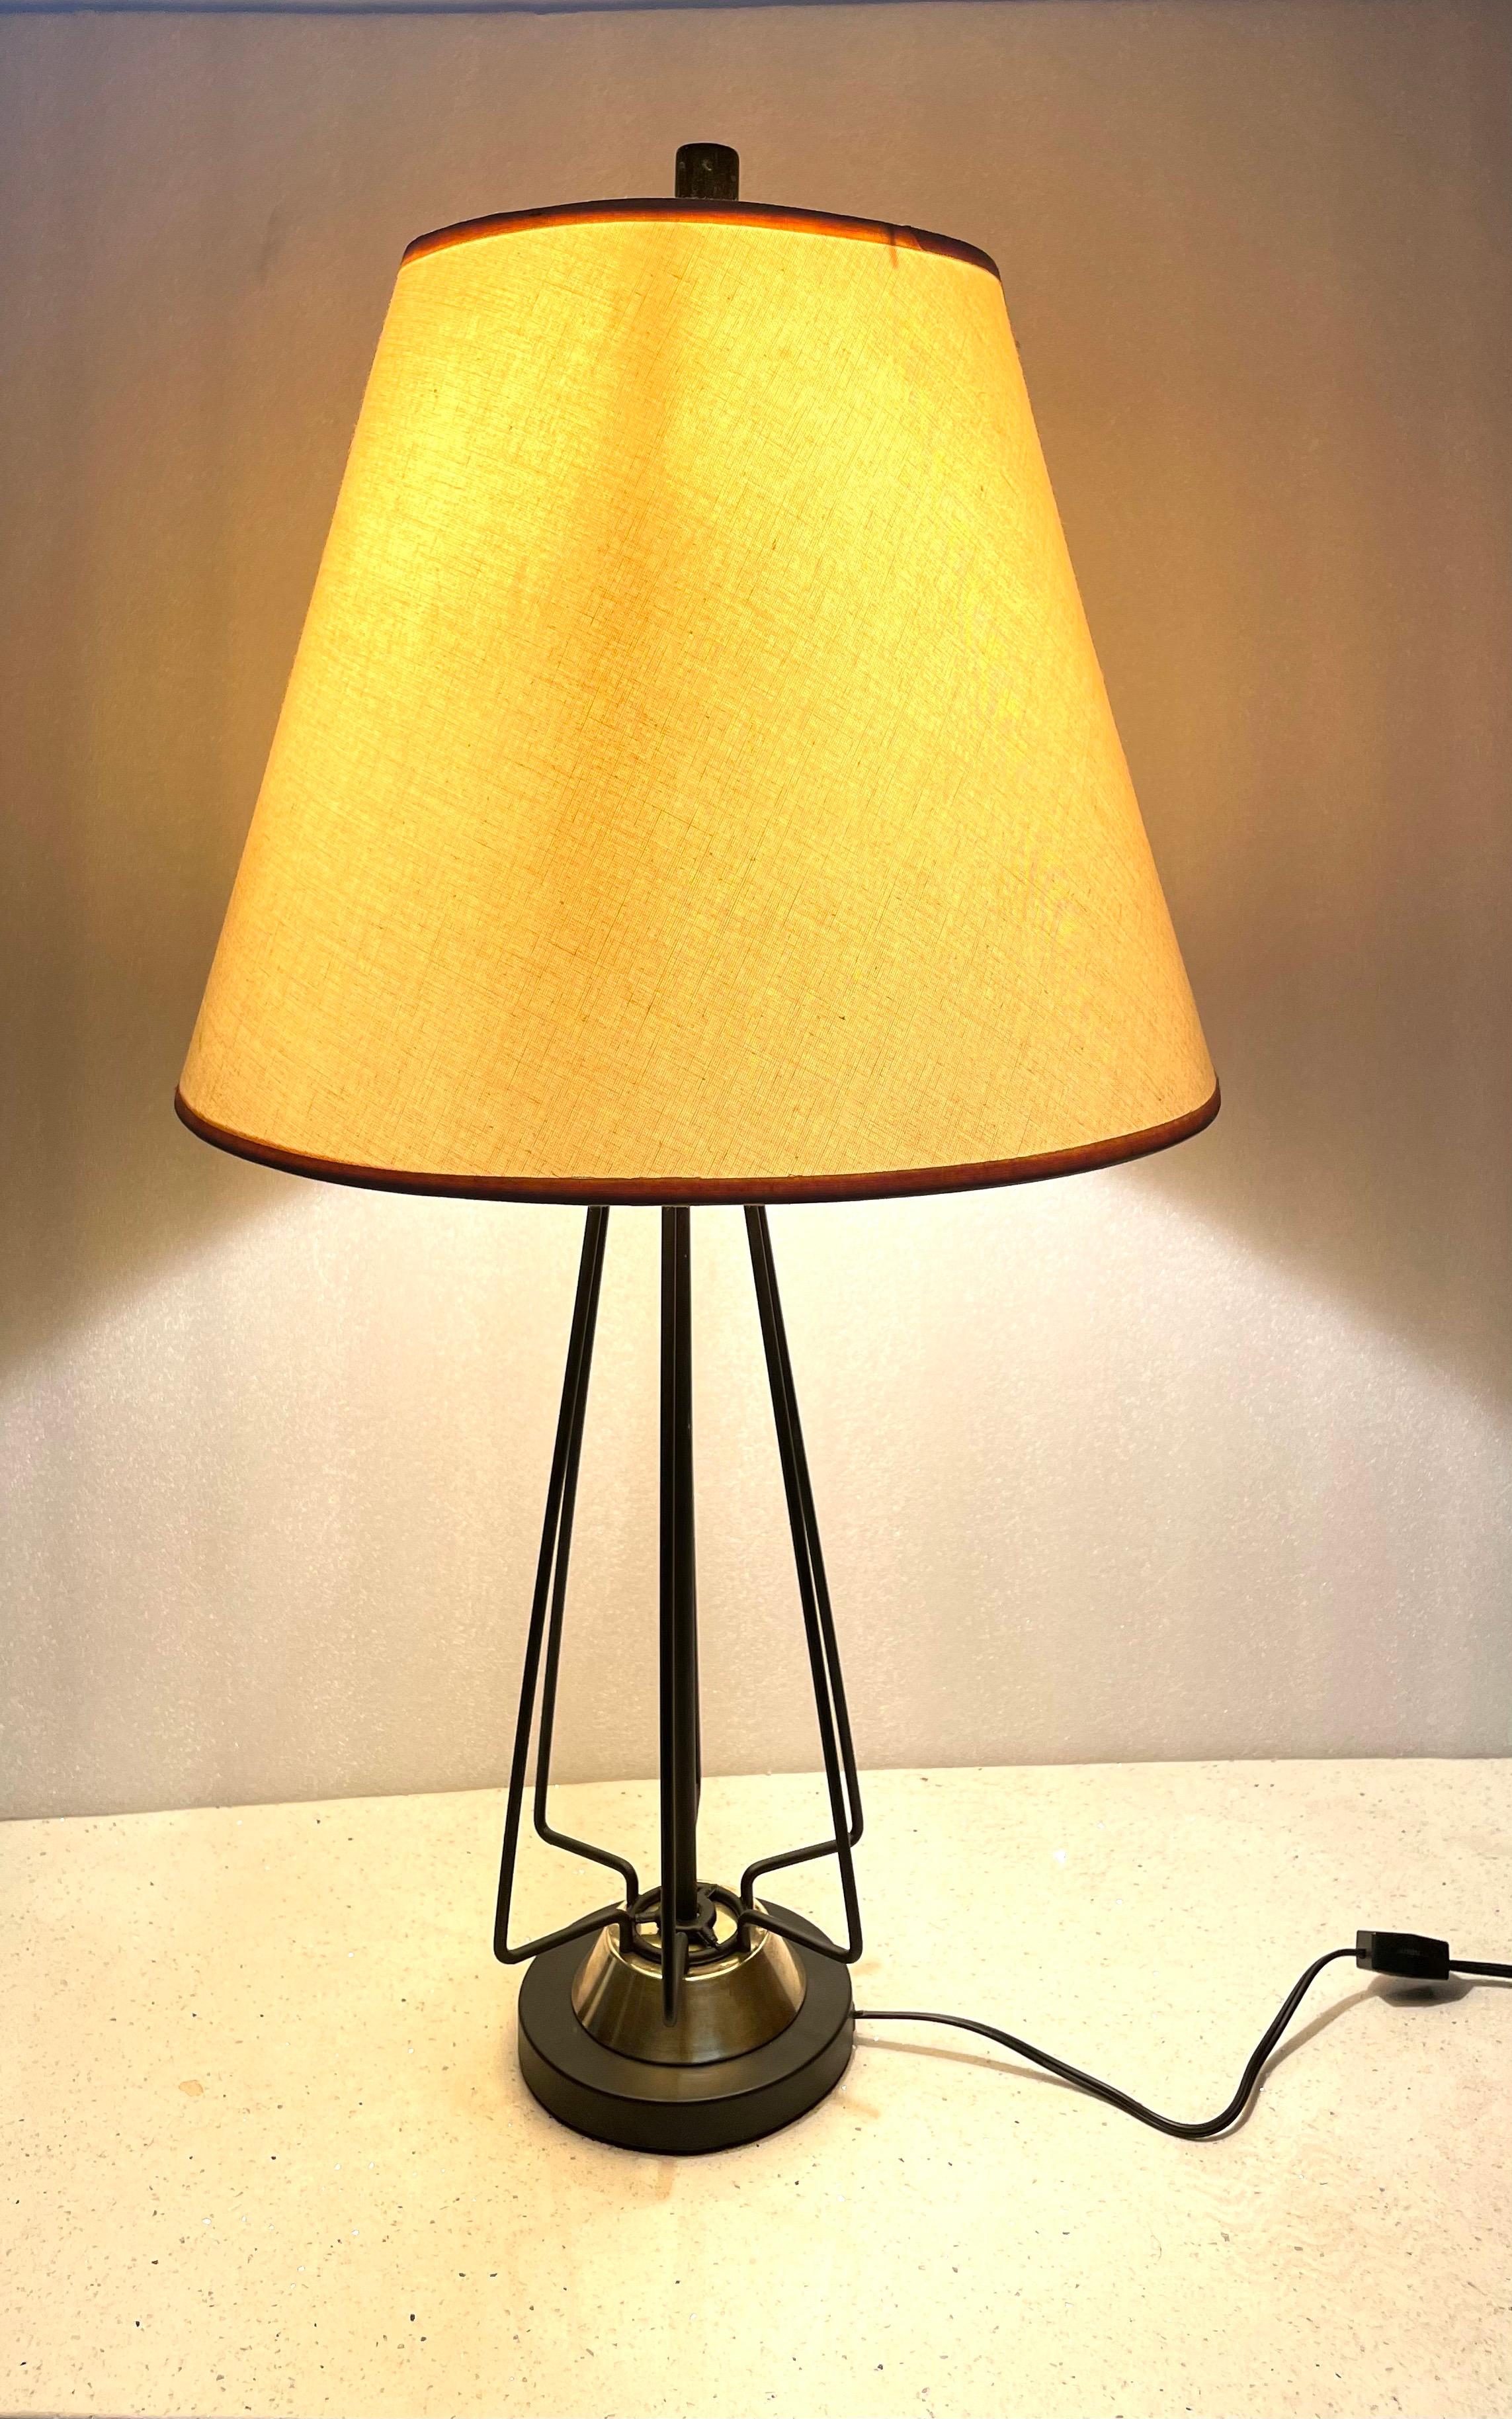 A classic mid-century we resprayed the base and left the original lampshade in original condition. modern atomic age table lamp, circa 1950's freshly rewired and replace the socket new cord, and switch.